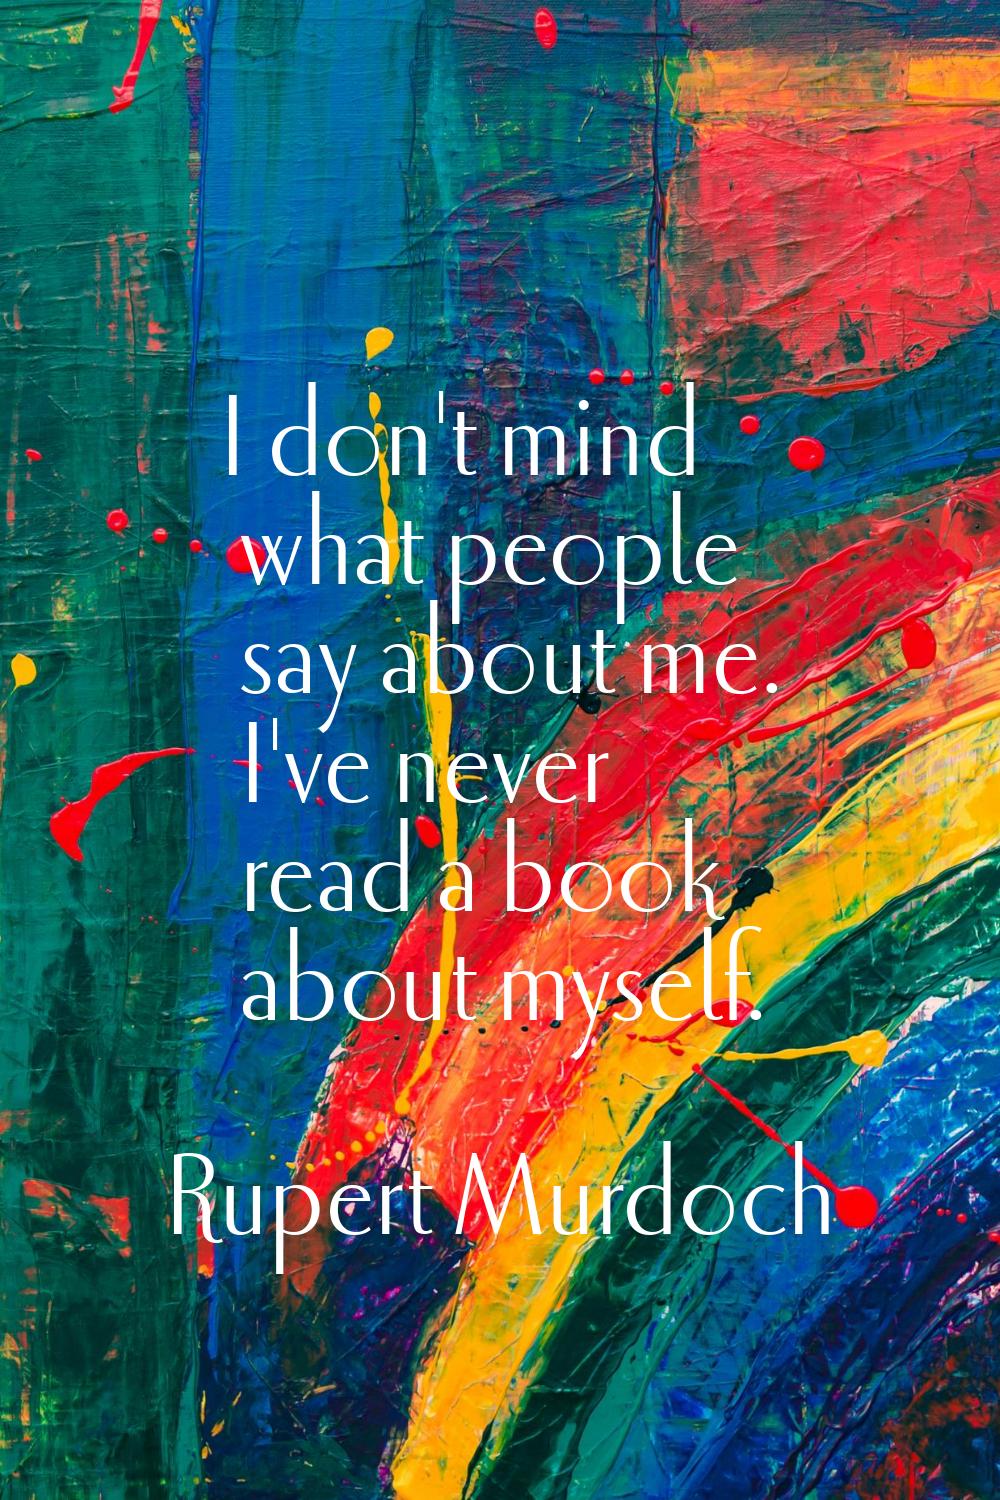 I don't mind what people say about me. I've never read a book about myself.